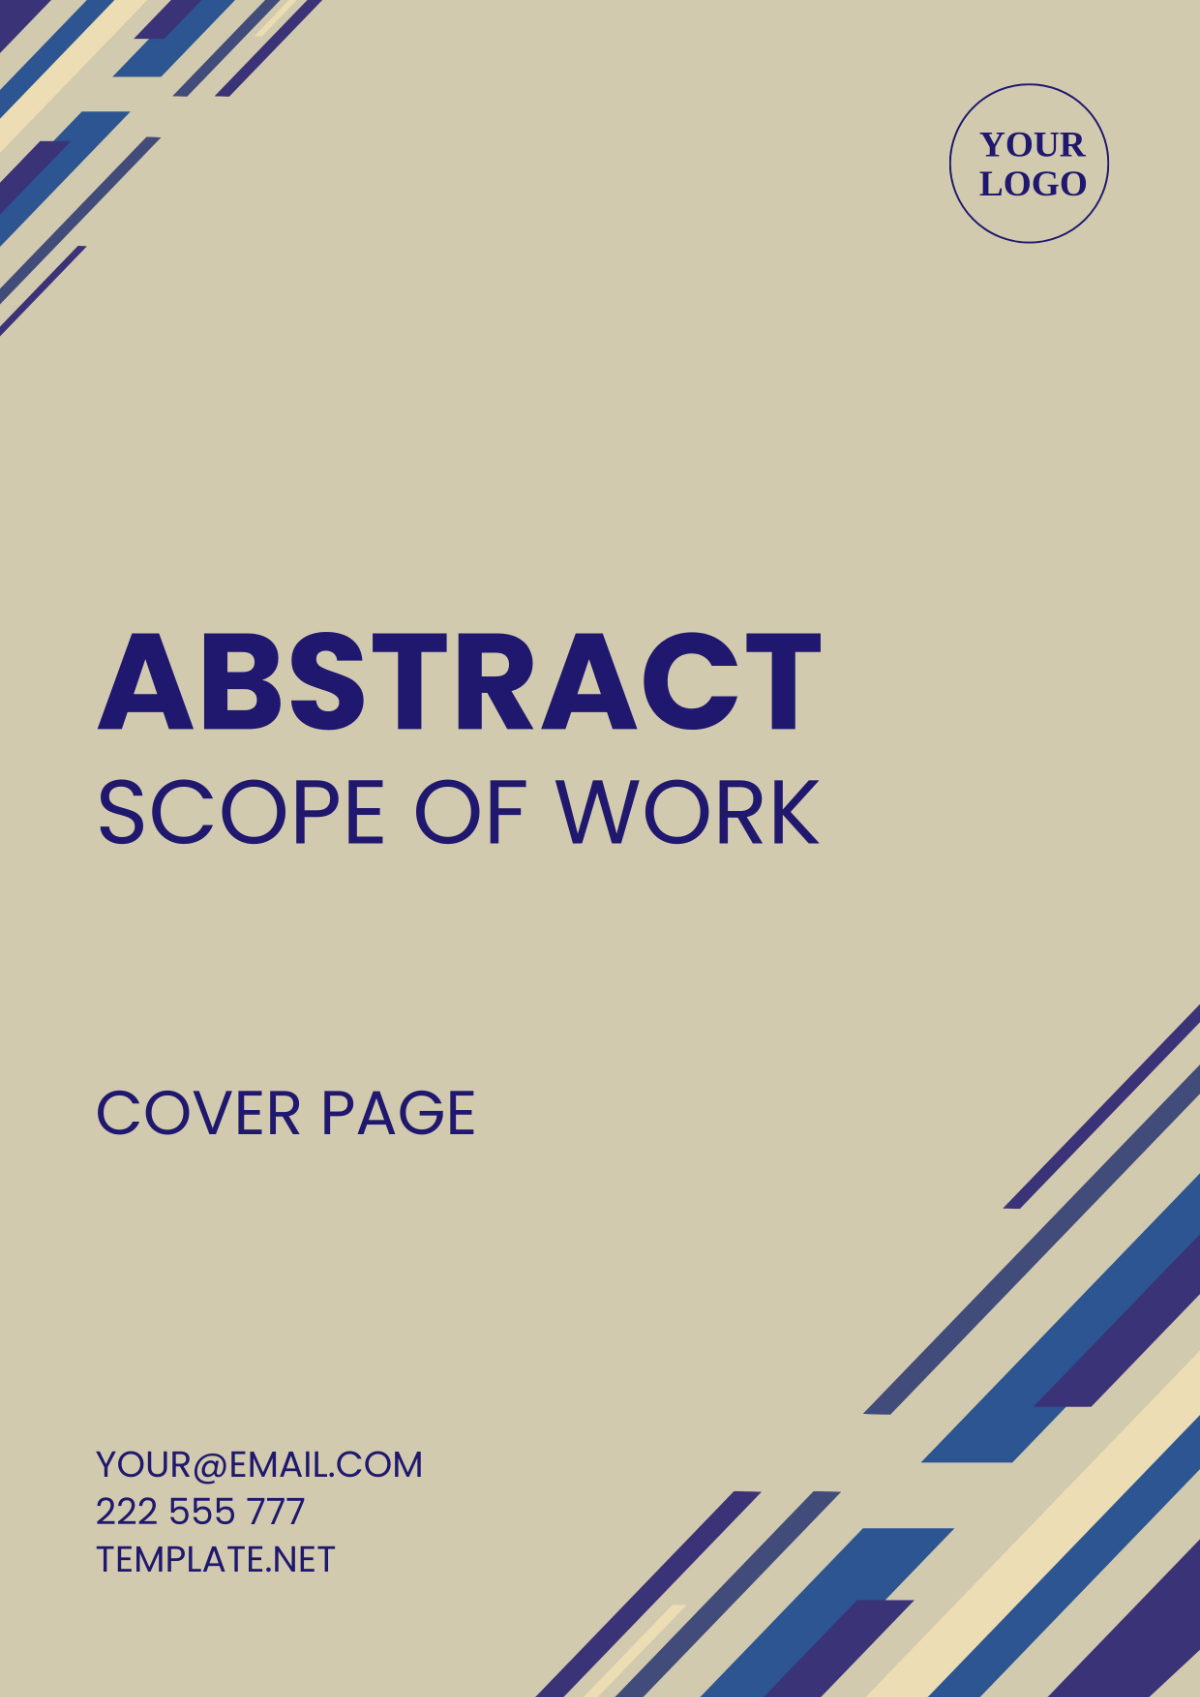 Abstract Scope of Work Cover Page Template